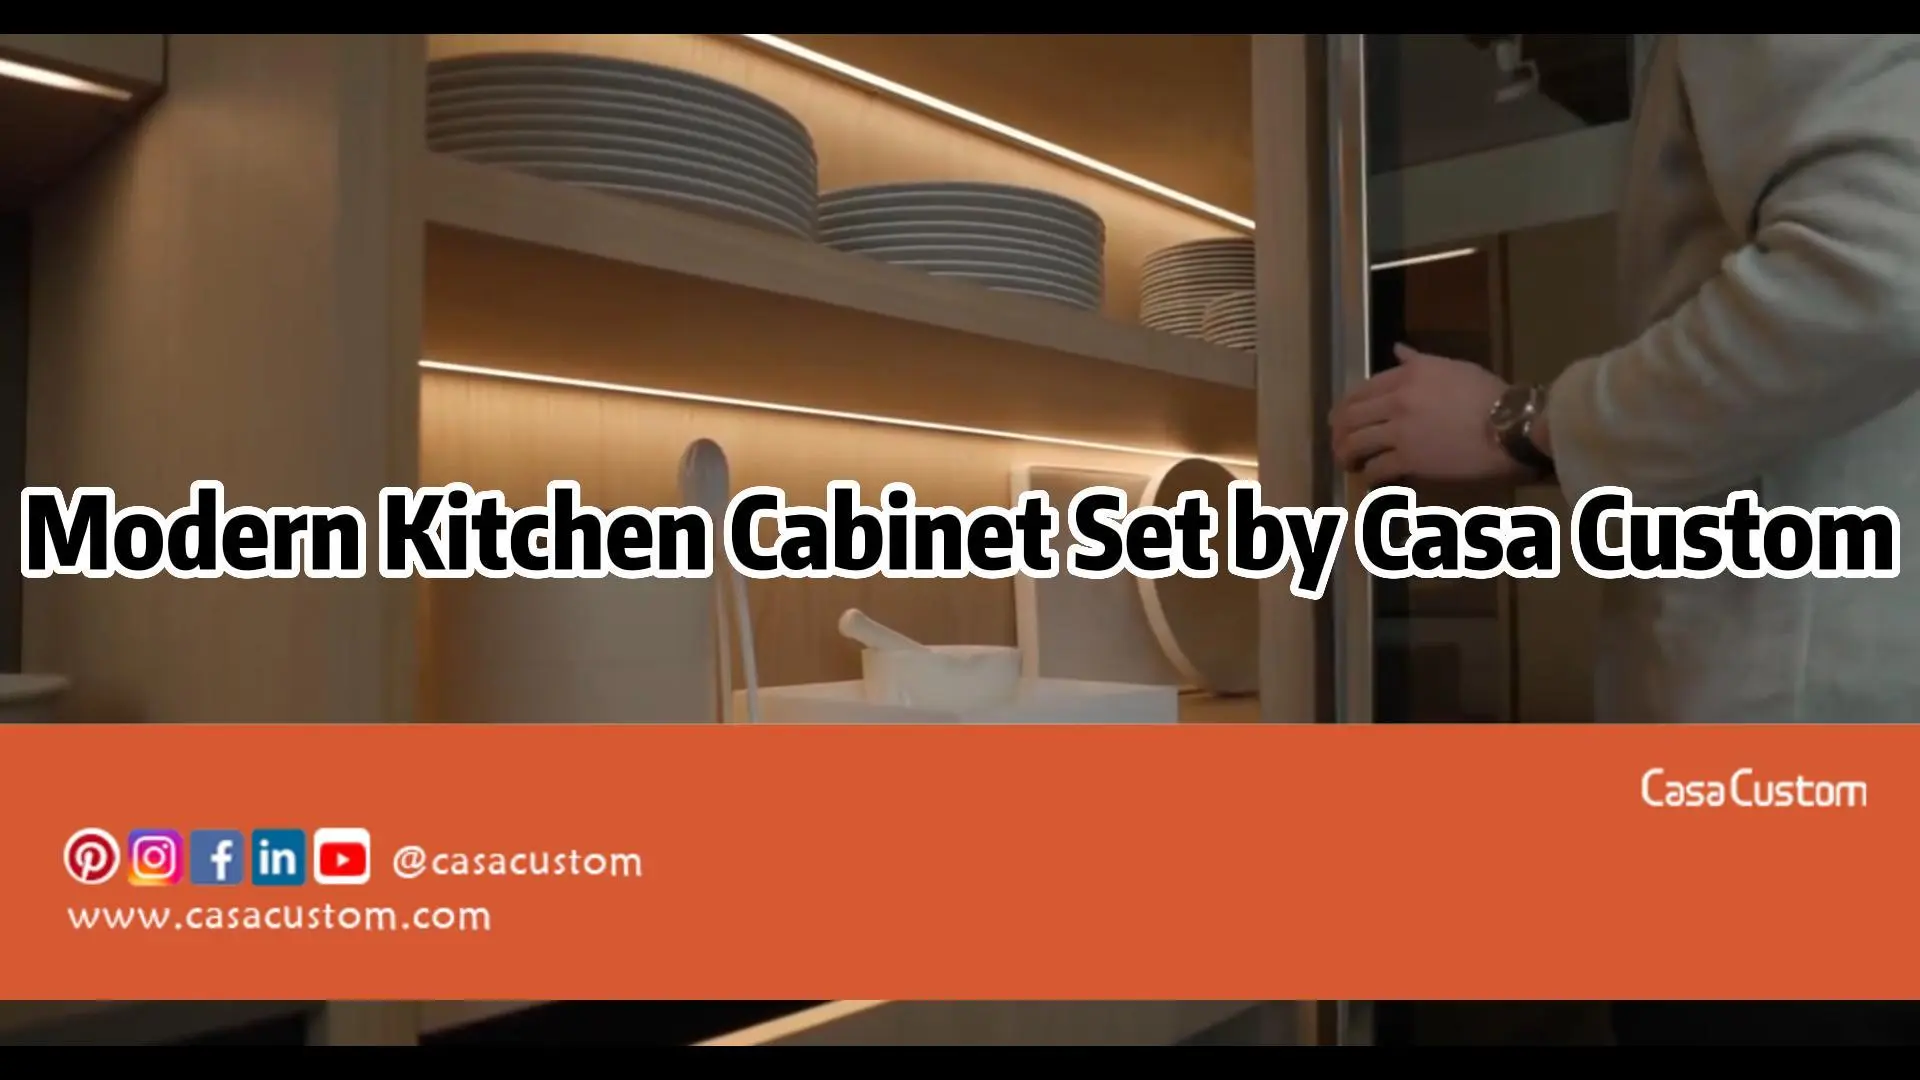 Casa Custom modern kitchen cabinet set features sintered stone countertop metal pull-out baskets and a sliding door pantry with glass doors.